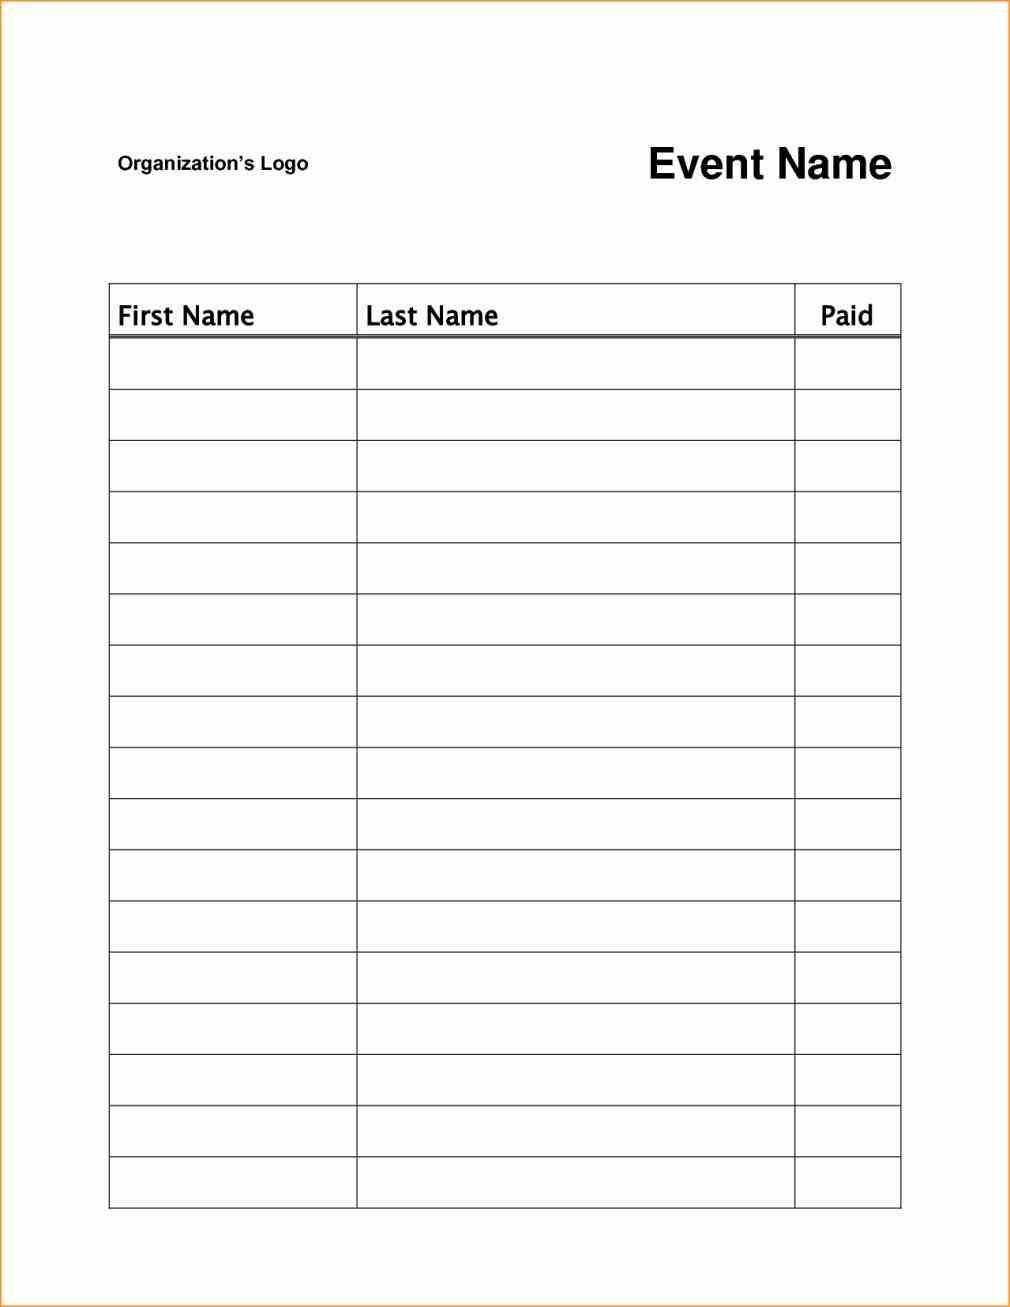 Event Or Class Workshop Forms A Sign Up Sheet Template Word Pertaining To Free Sign Up Sheet Template Word